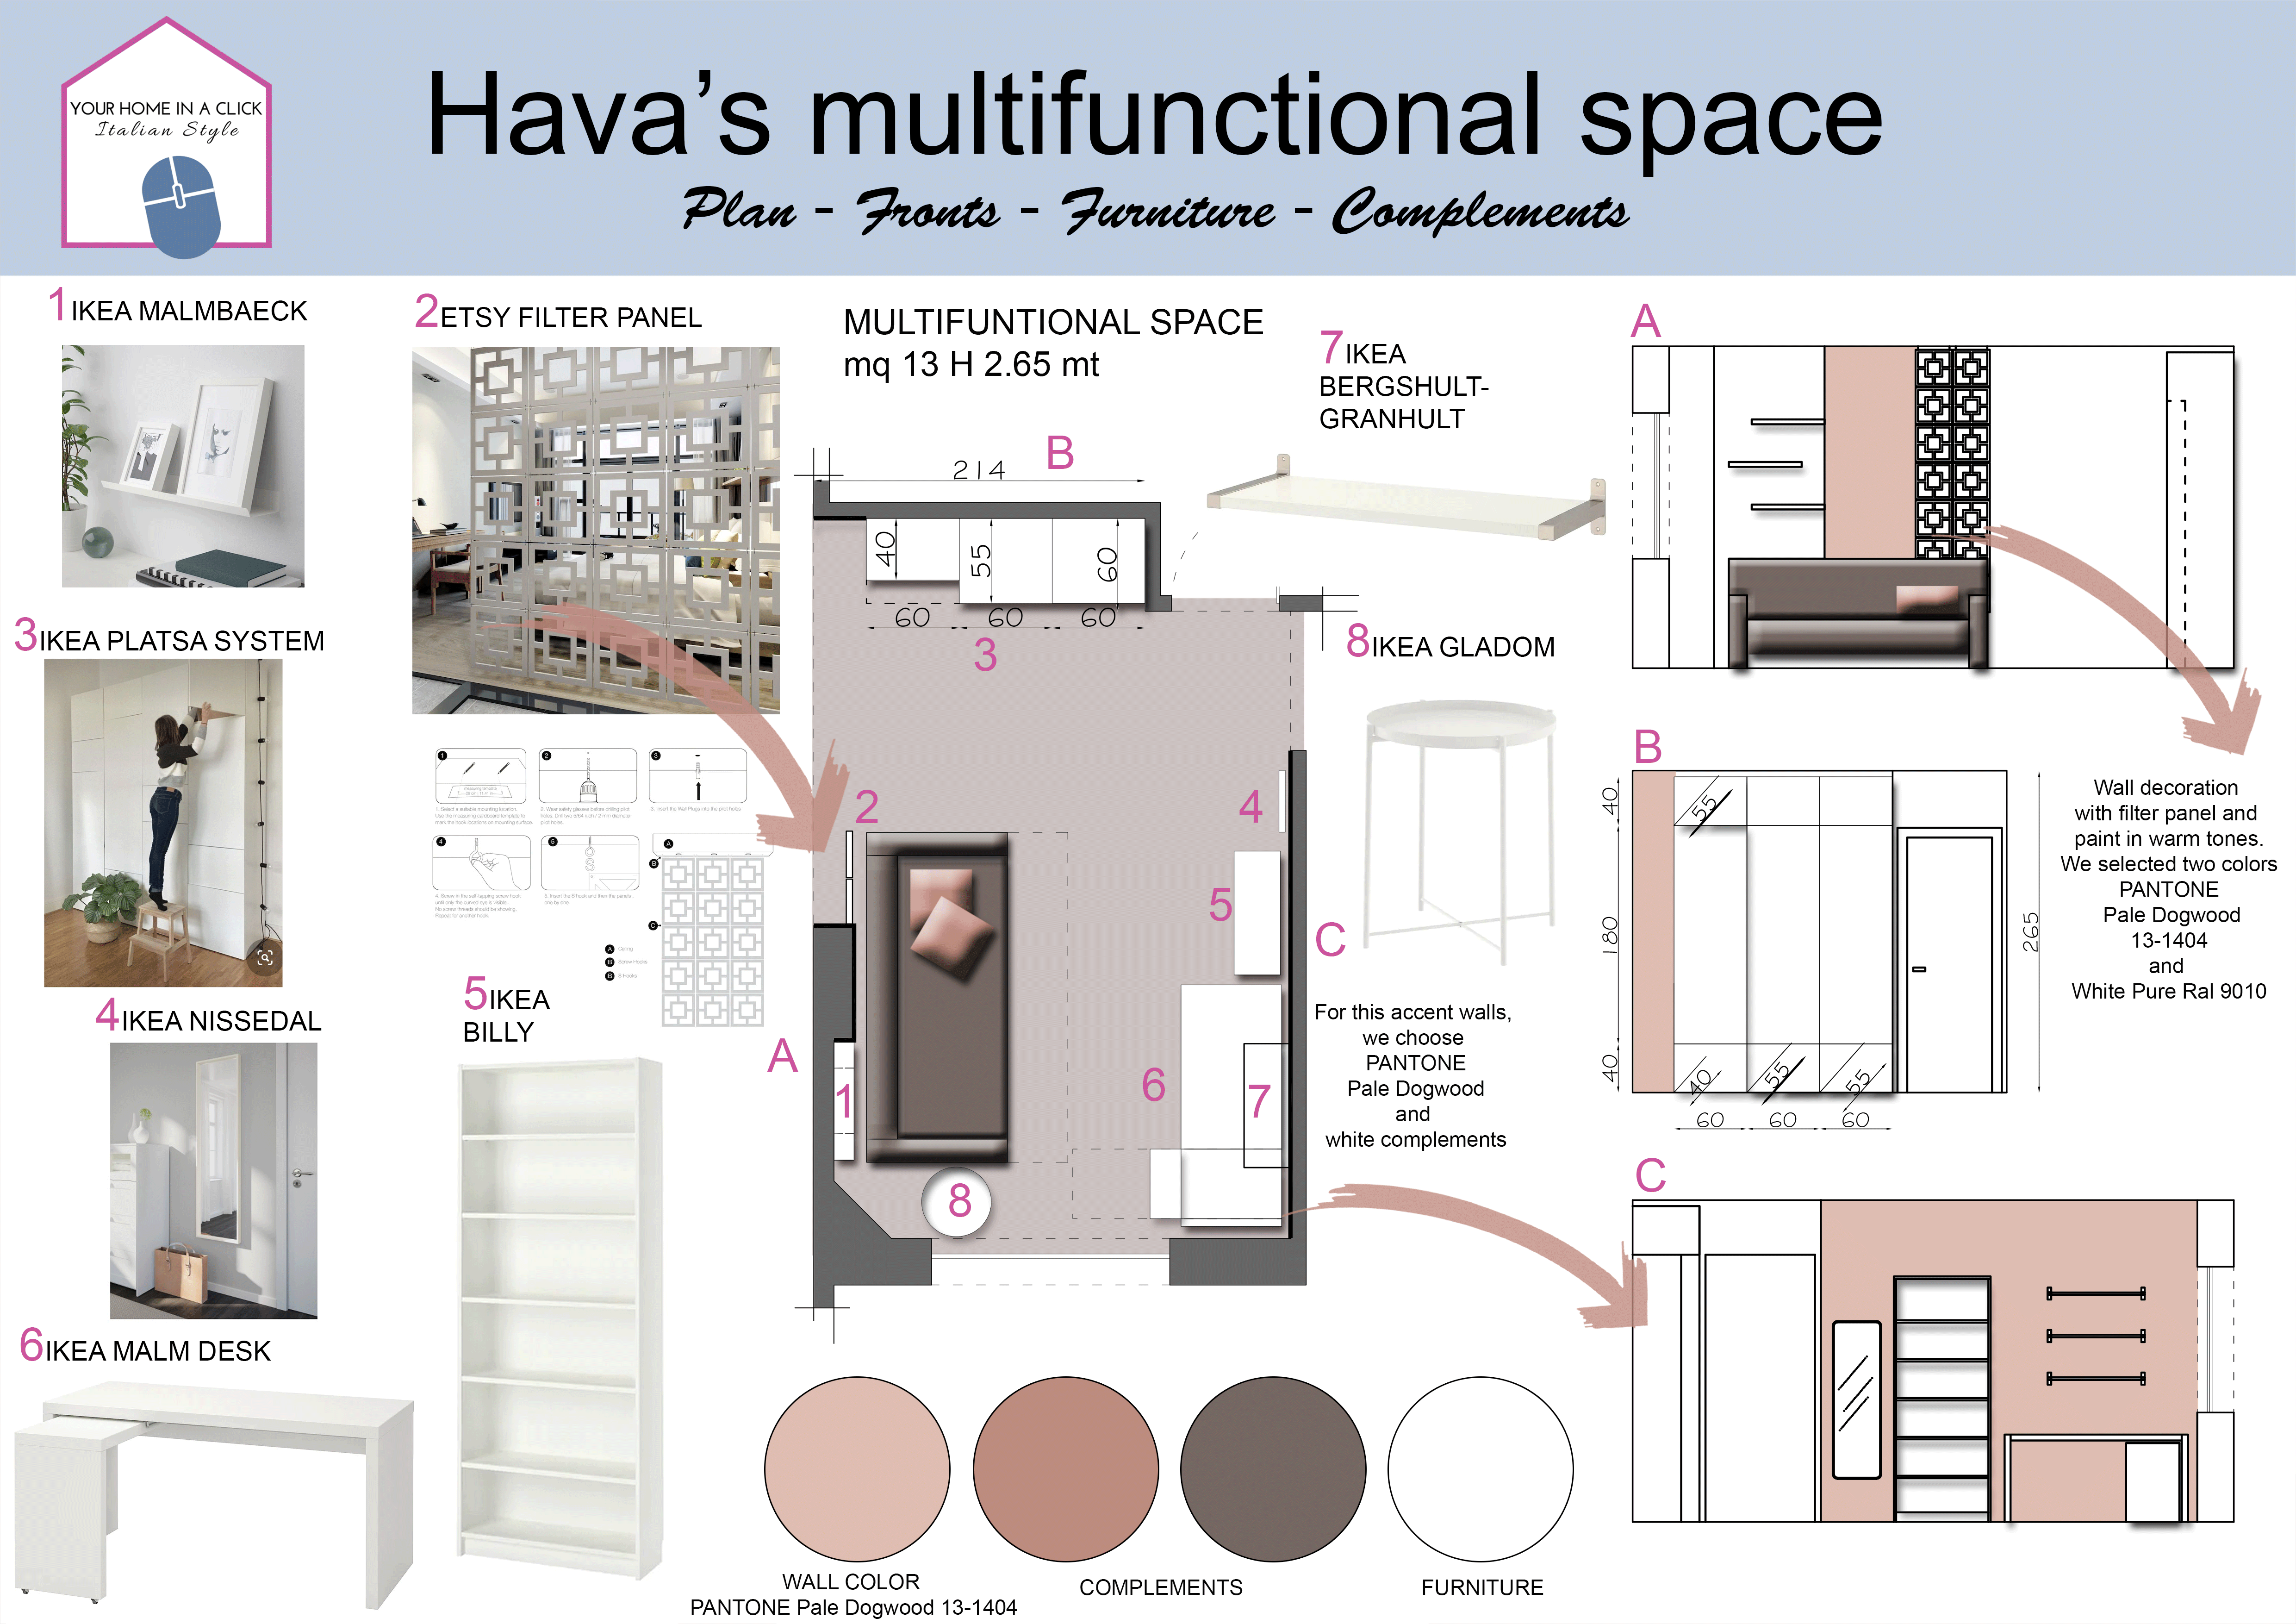 Design proposal for a muntifunctional space